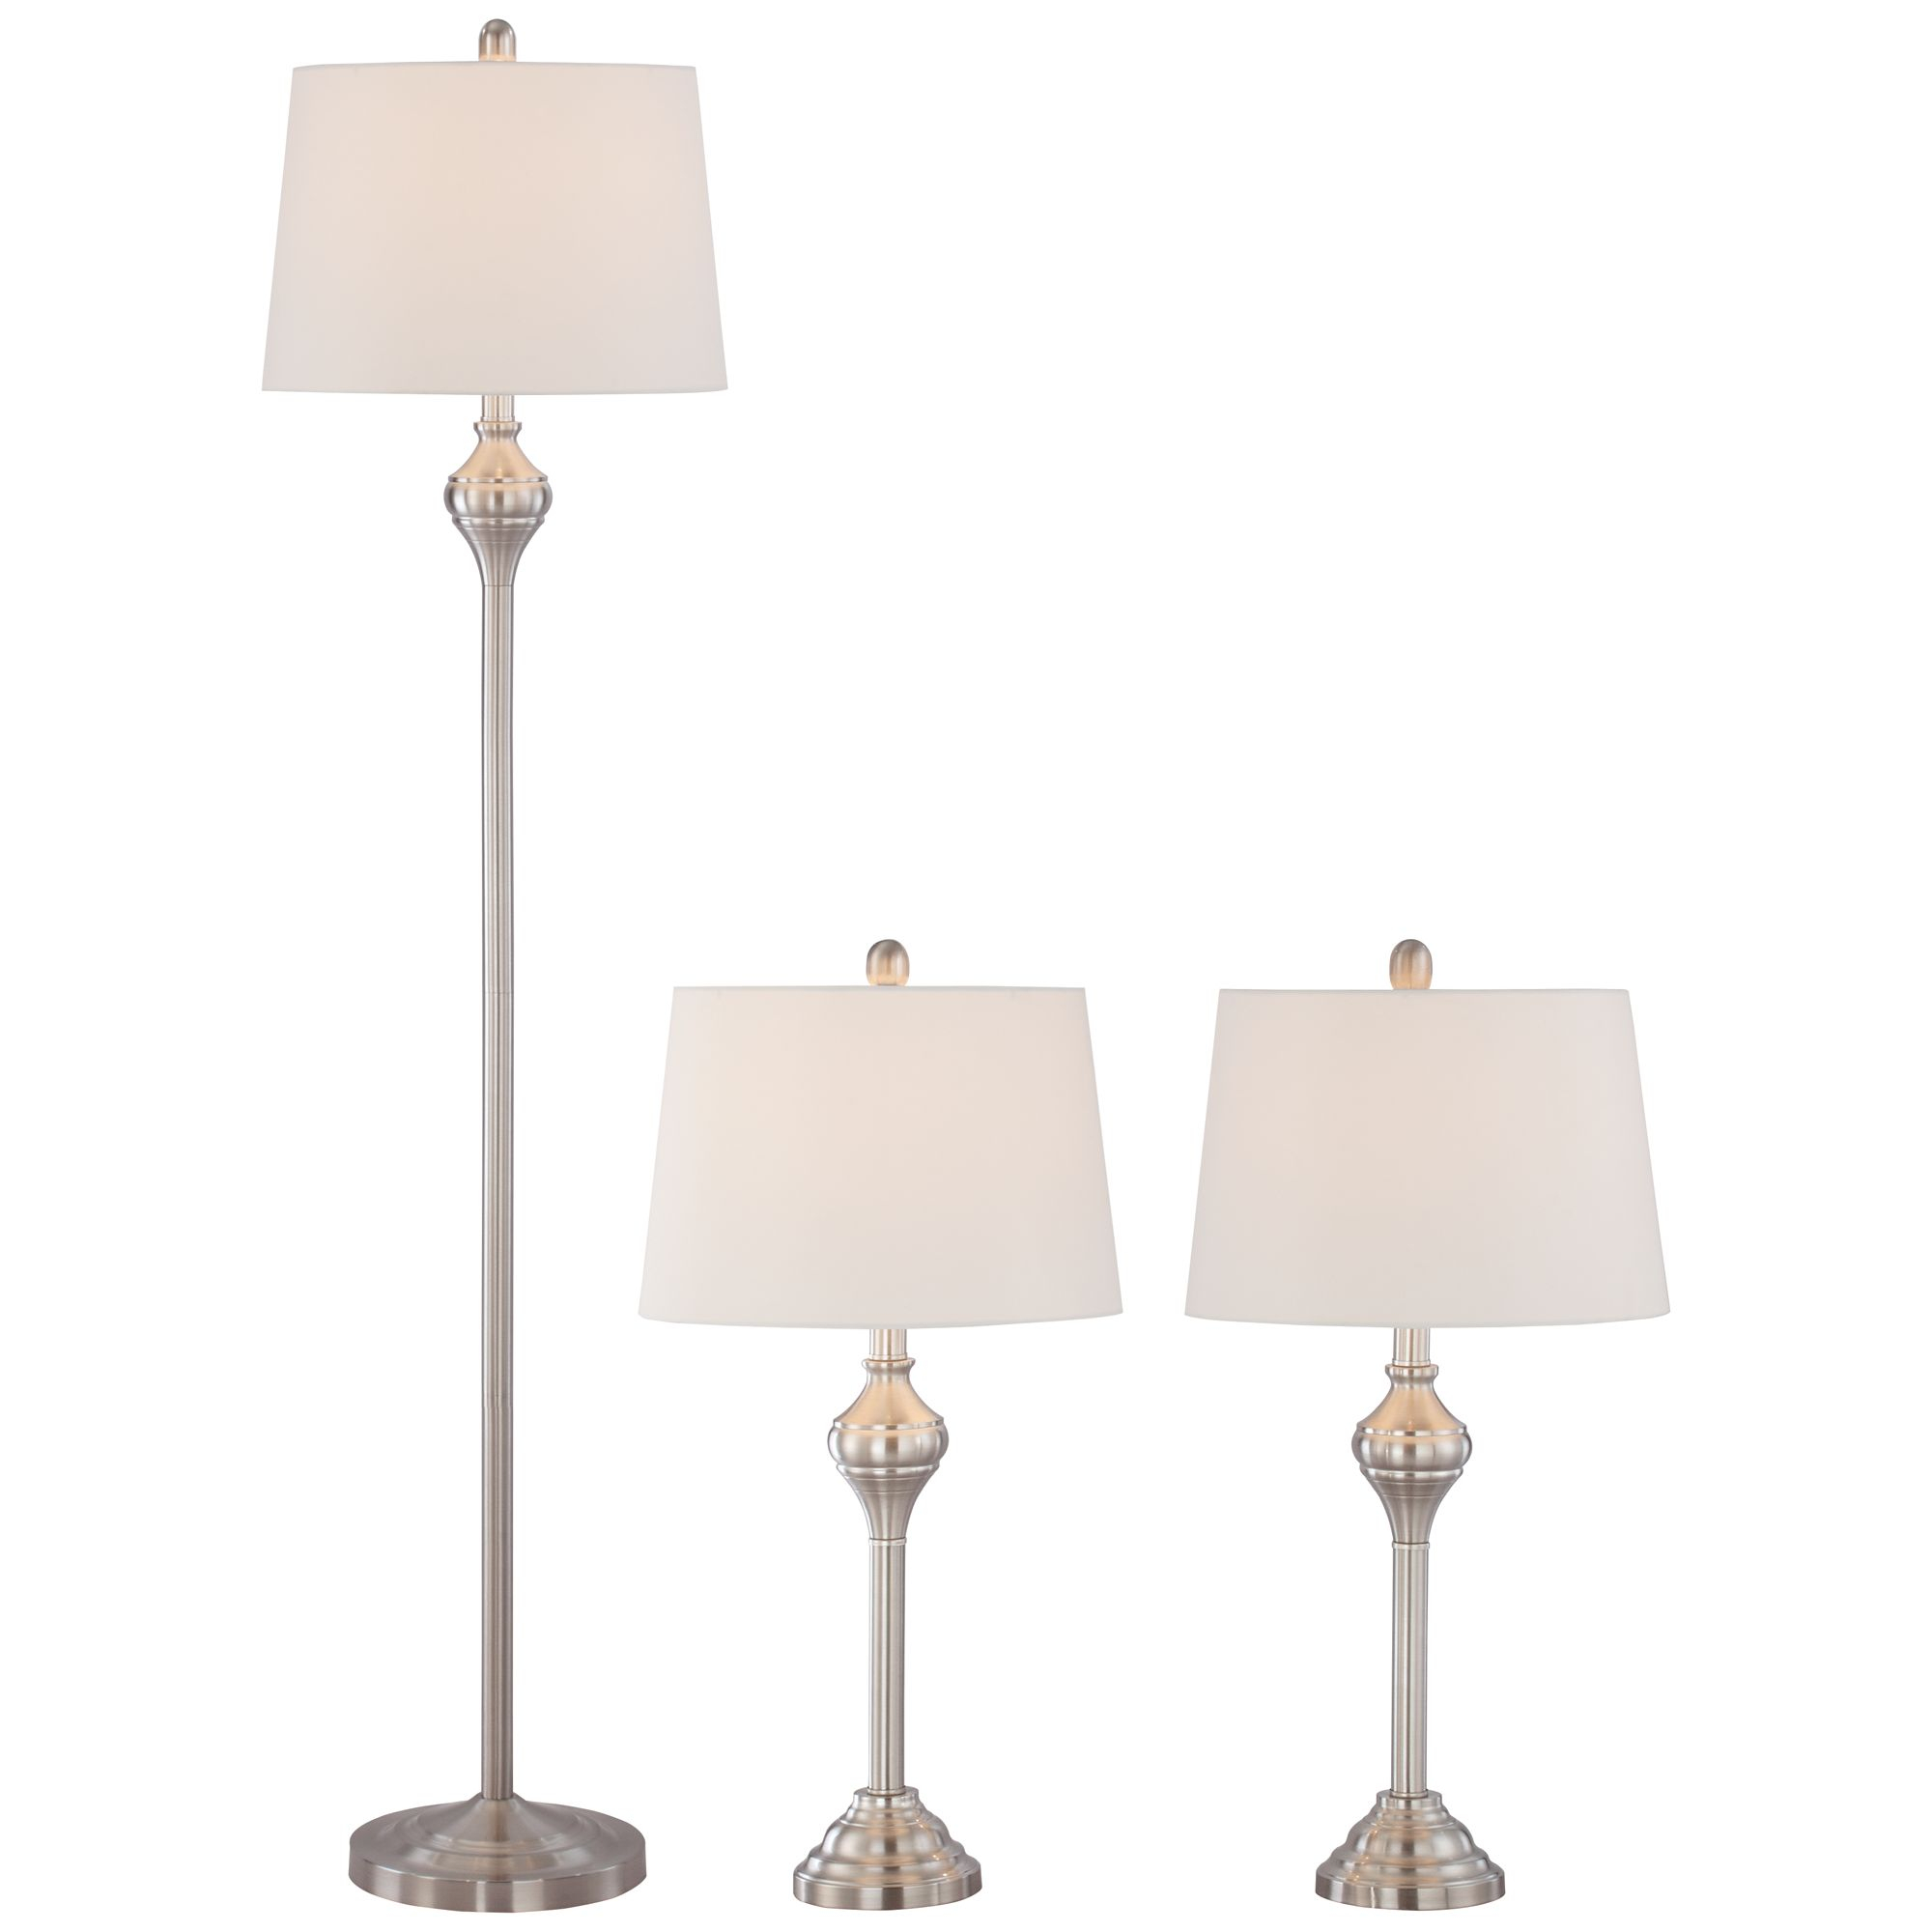 Barnes And Ivy Traditional Table Floor Lamps Set Of 3 Brushed Steel White Tapered Drum Shade For Living Room Family Bedroom Walmart in measurements 2000 X 2000